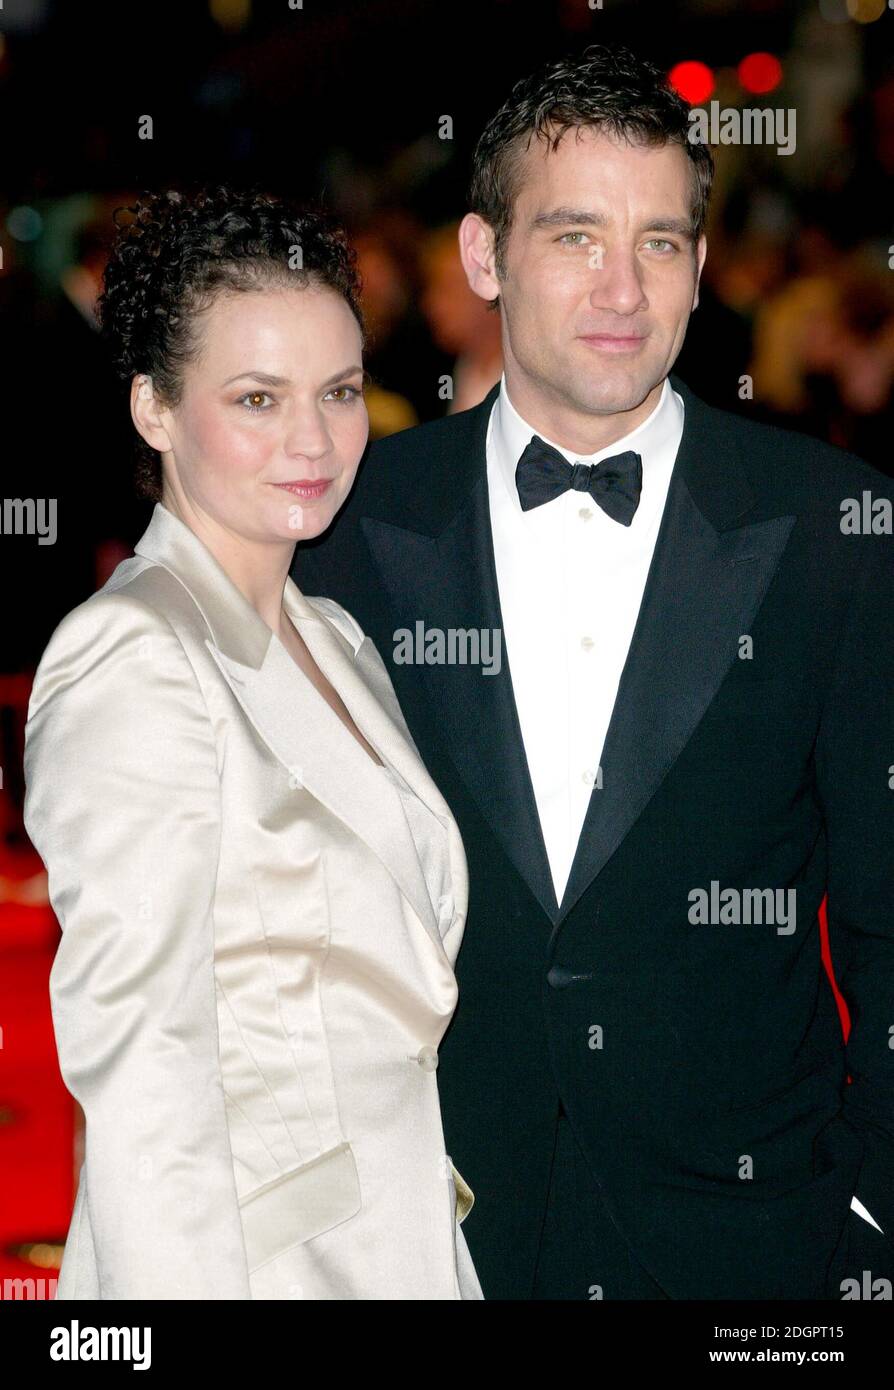 Clive Owen and wife arriving at the BAFTA's 2005, Leicester Square, London. Doug Peters/allactiondigital.com  Stock Photo